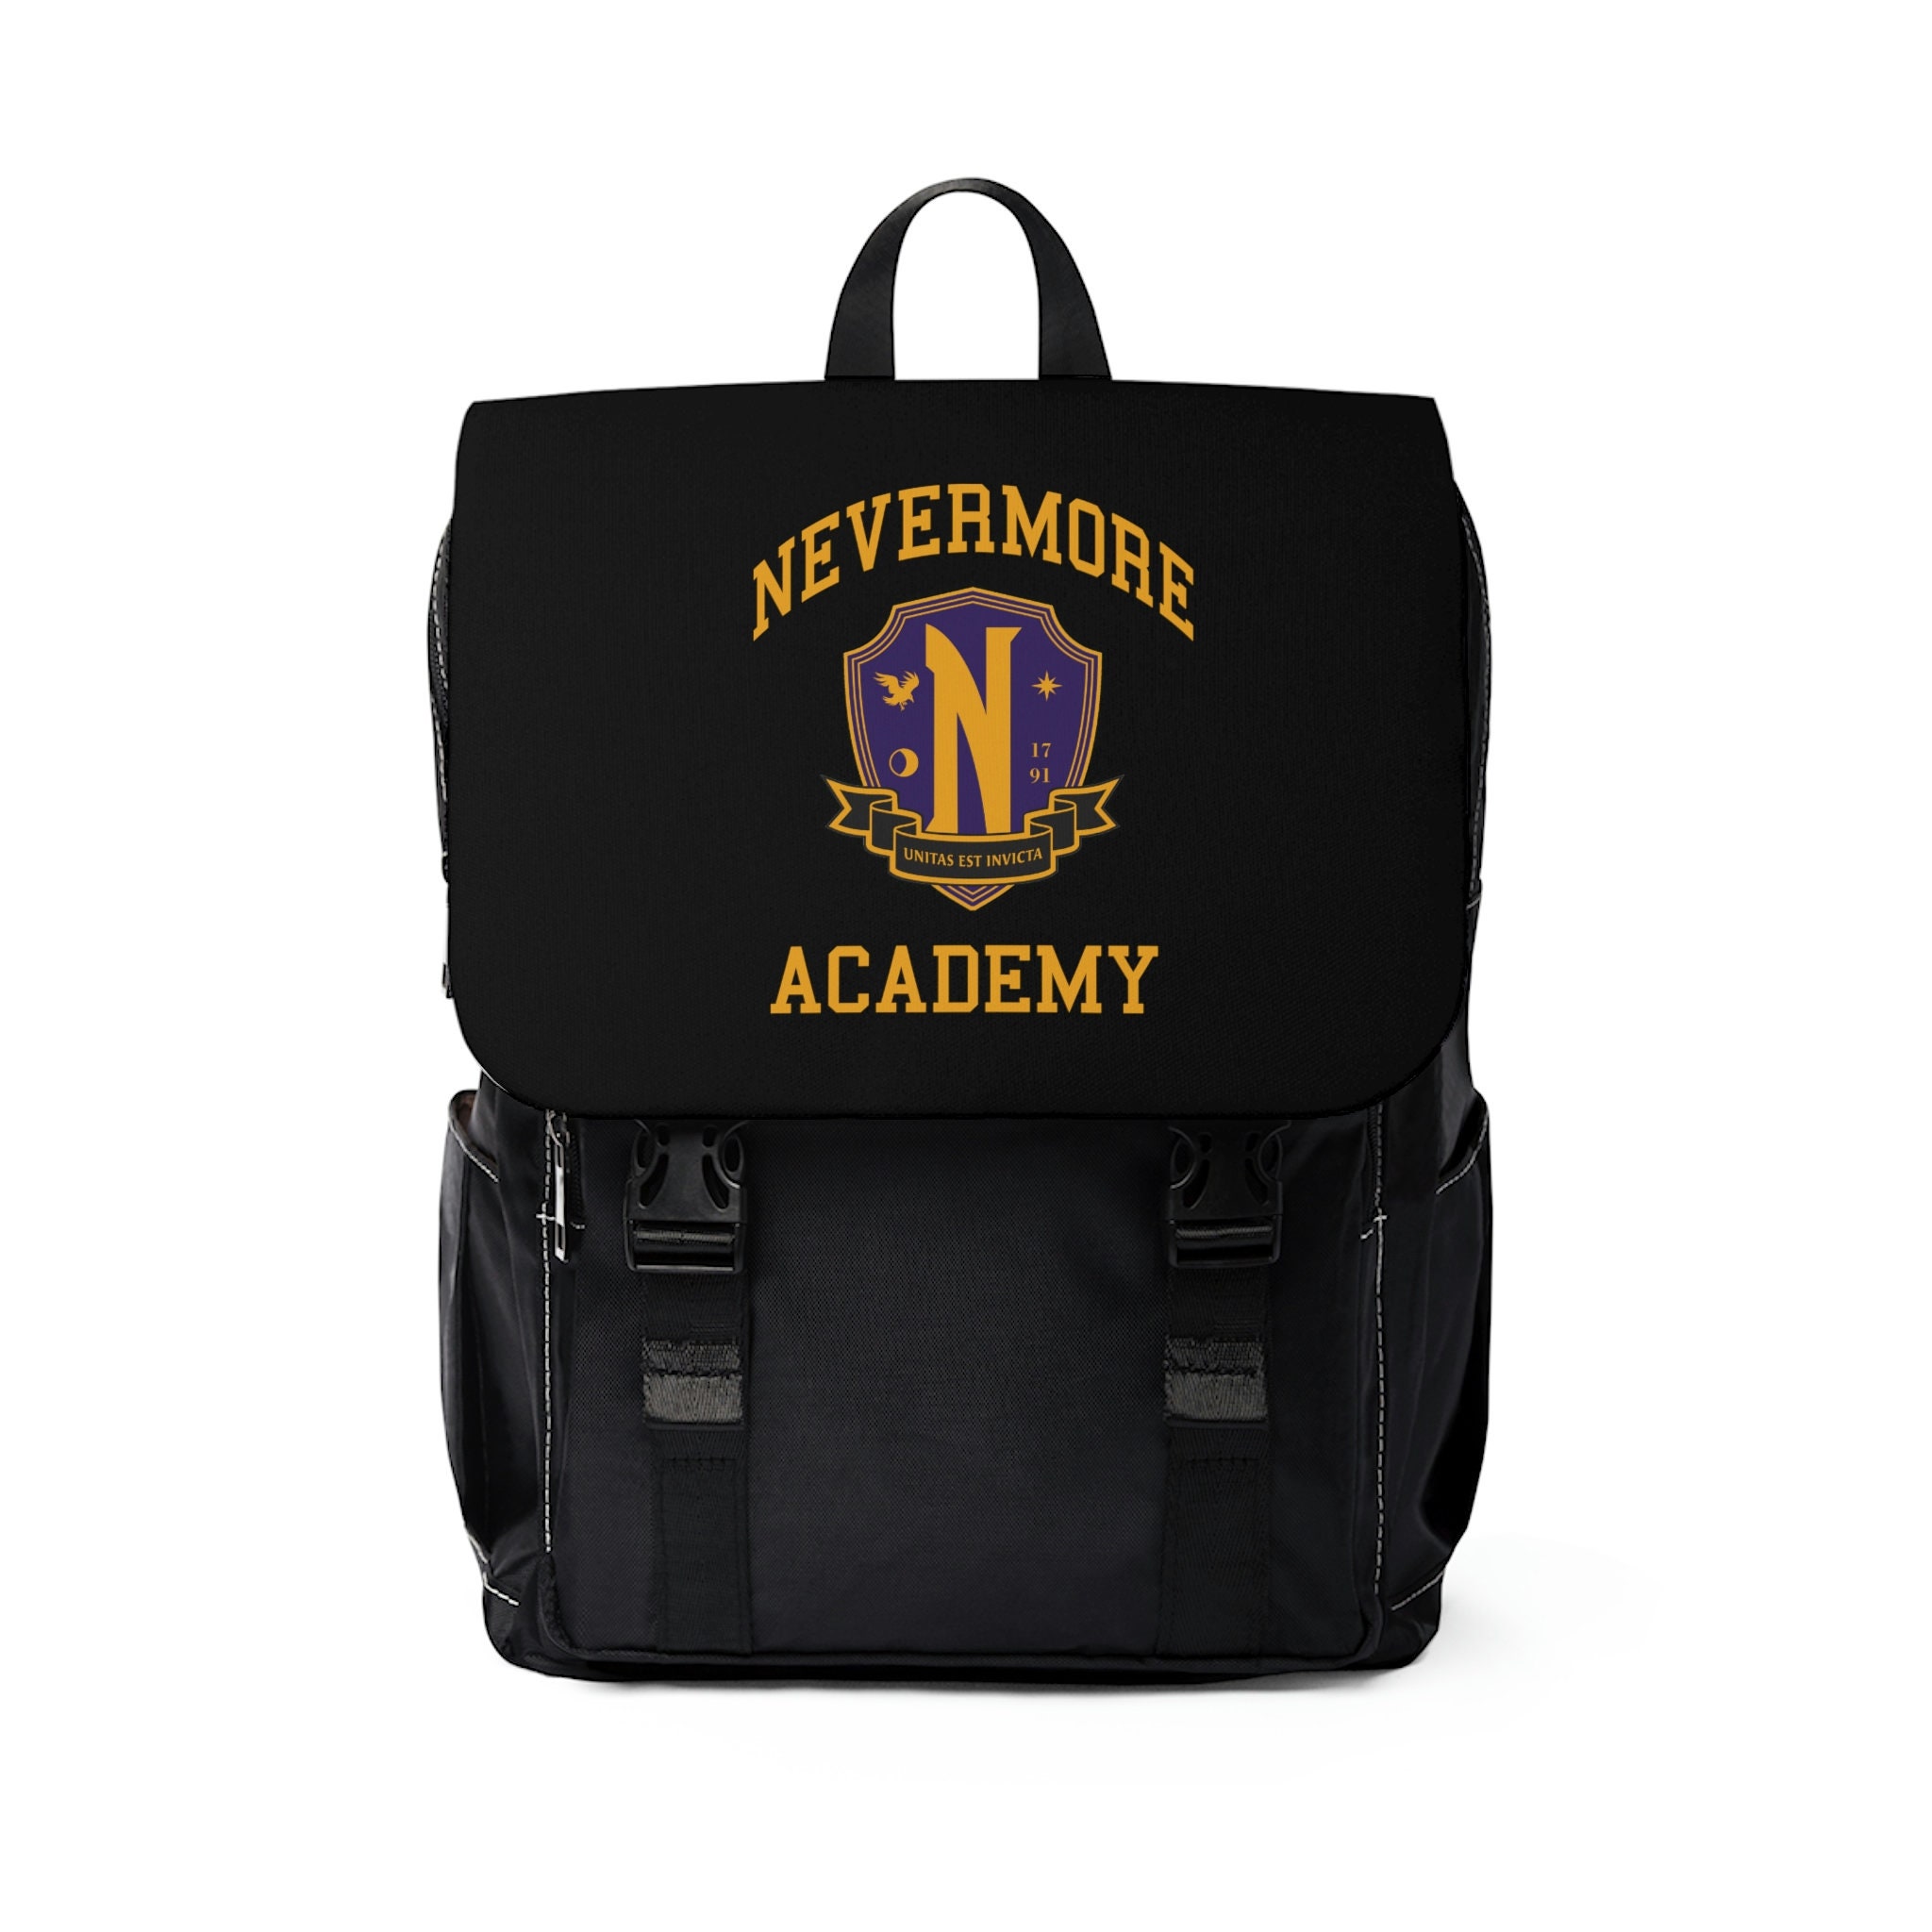 Discover Nevermore Academy Unisex Casual Shoulder Backpack